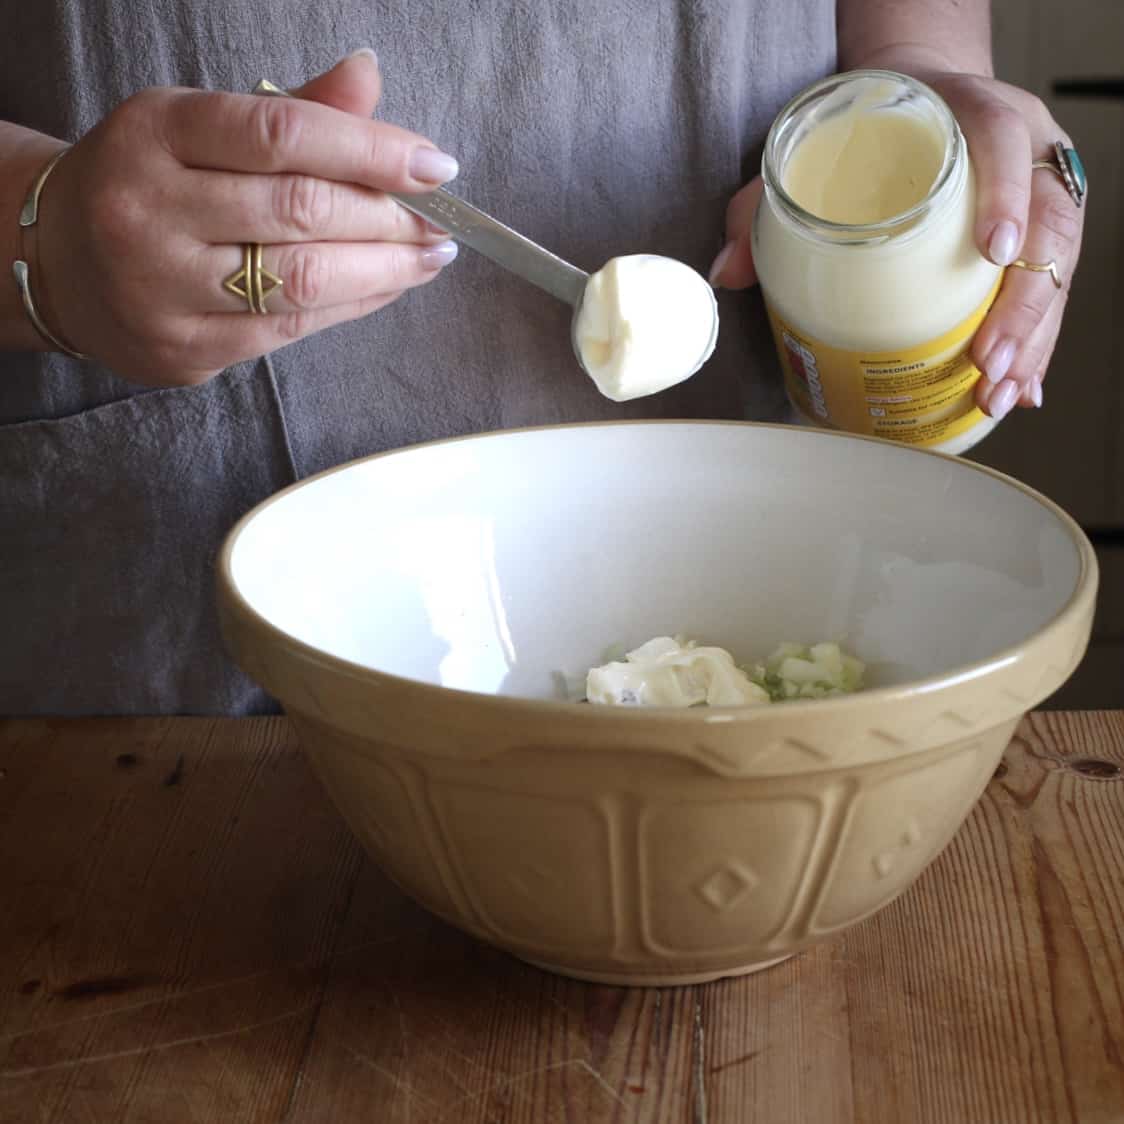 Woman hands holding a spoon of mayonnaise over a brown mixing bowl